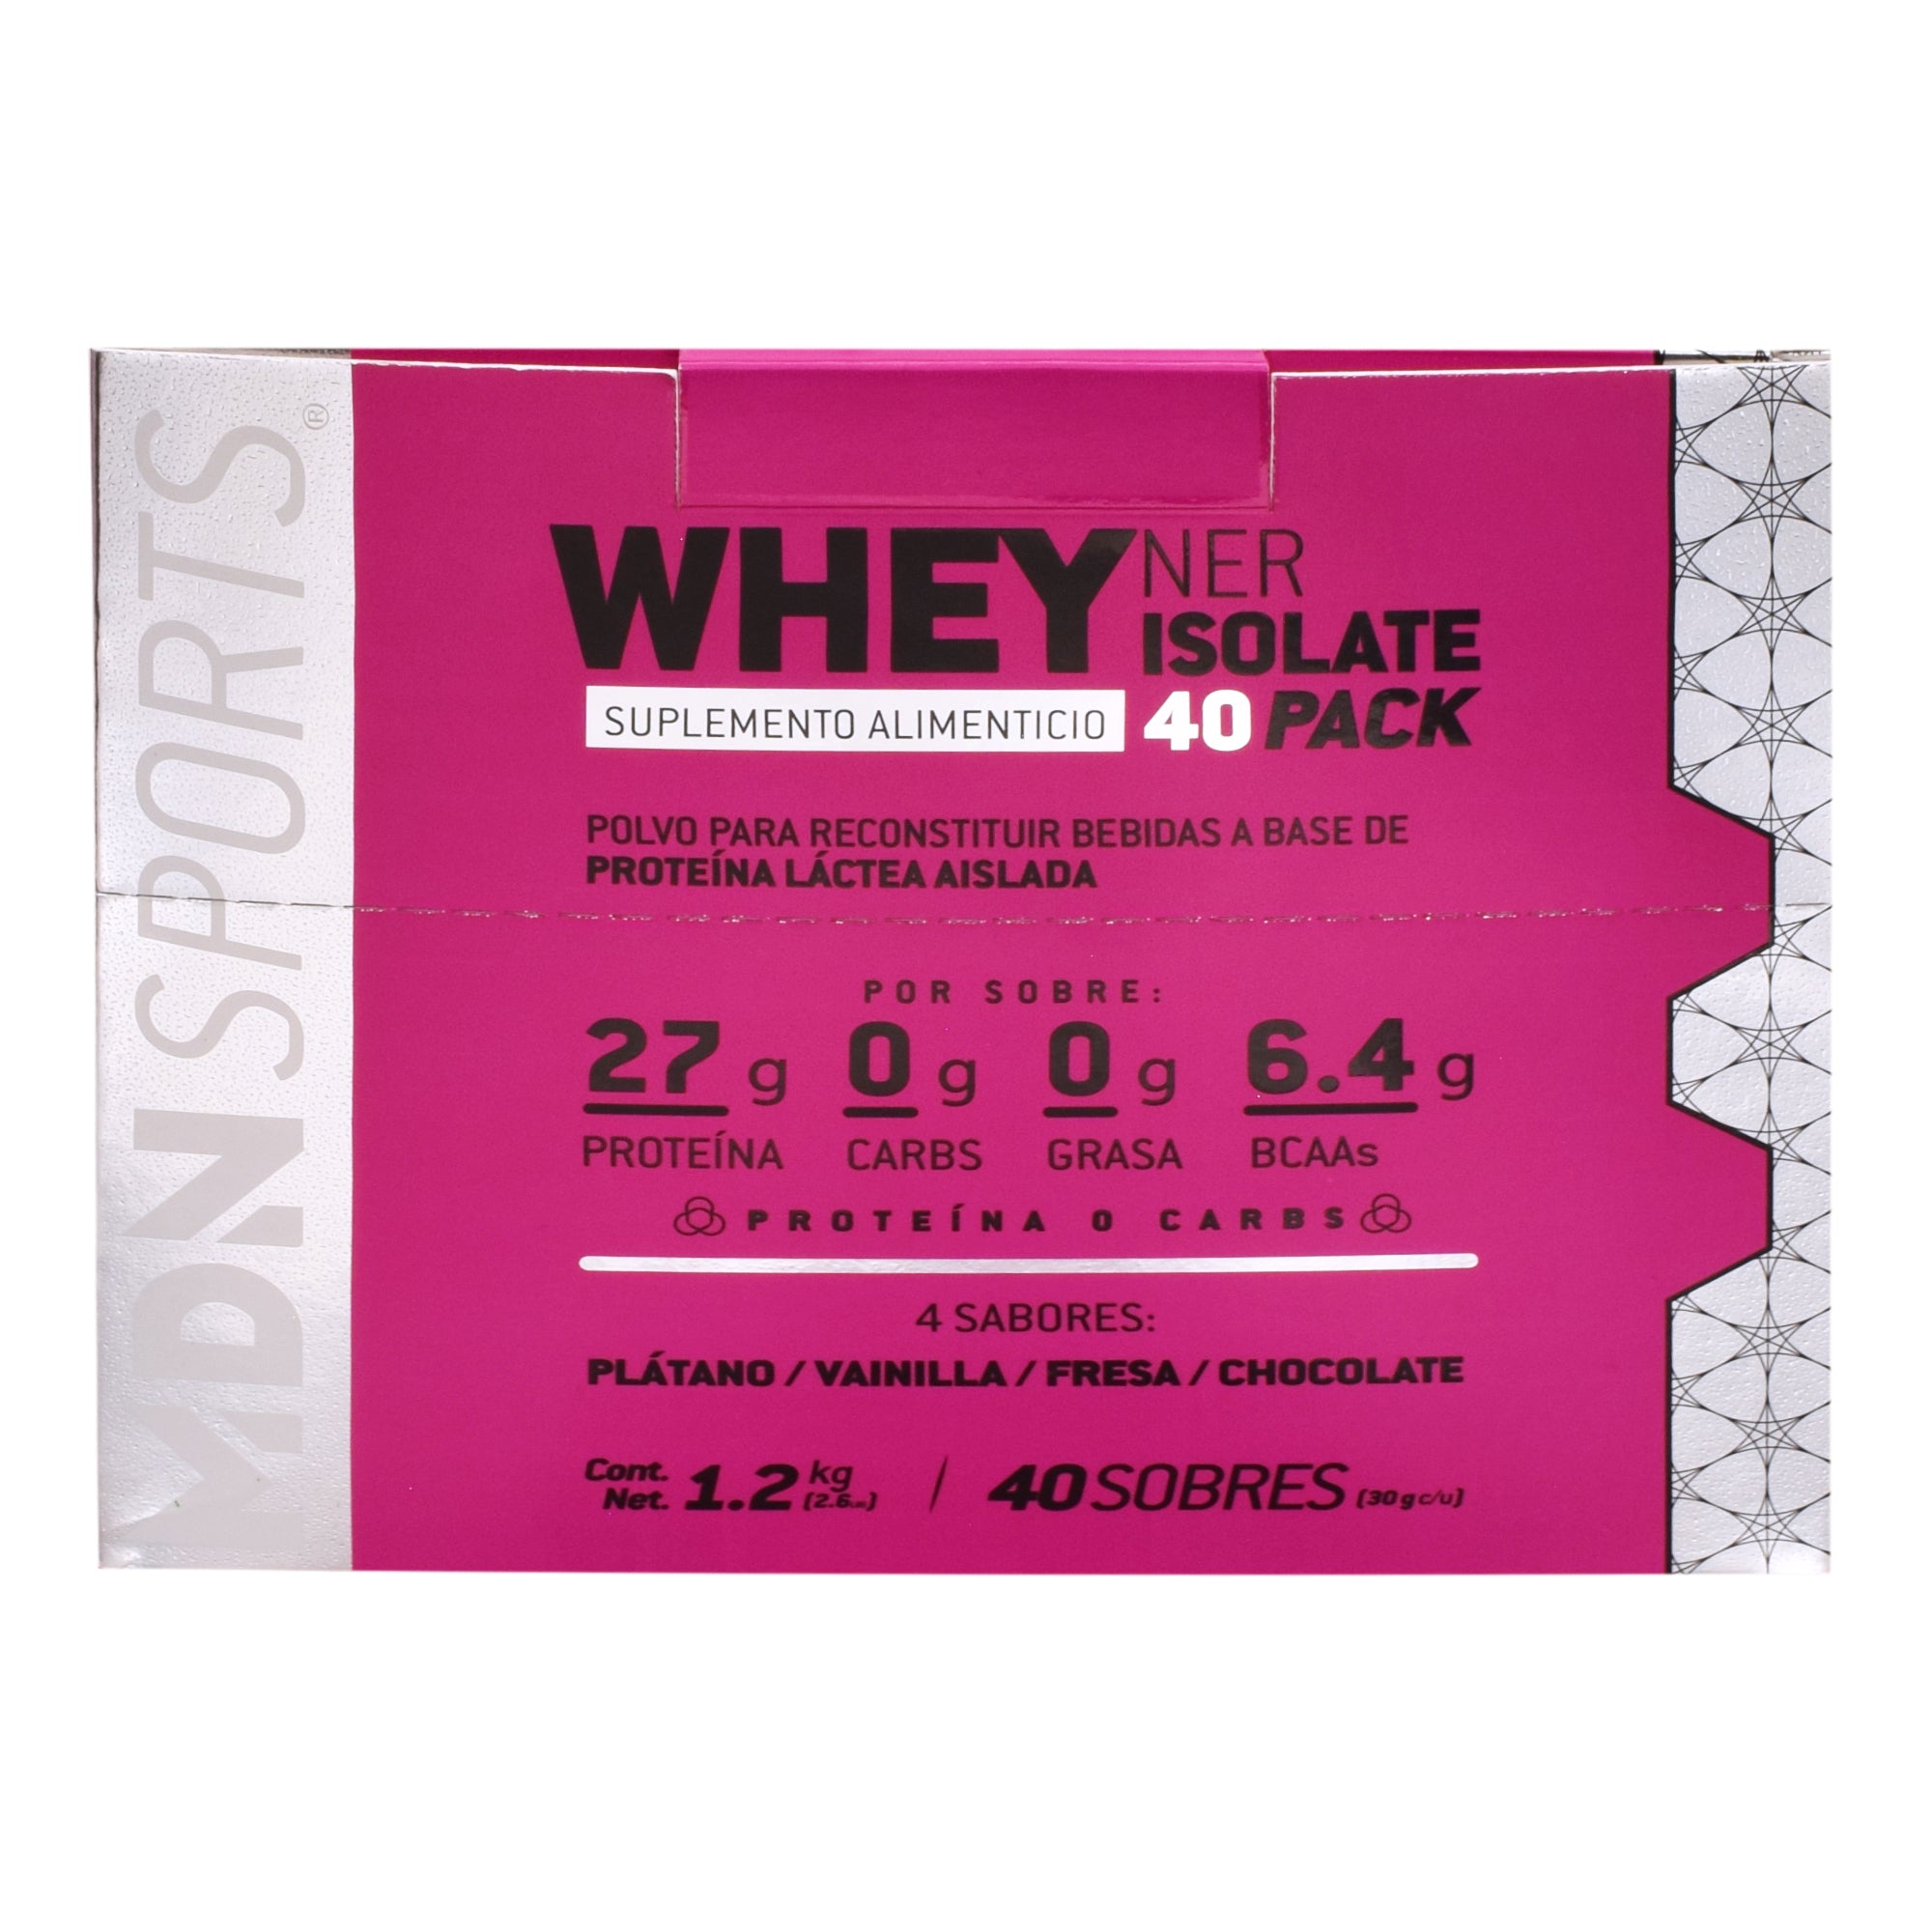 WHEY NER ISOLATE VARIOS SABORES 30 G PAQUETE 40